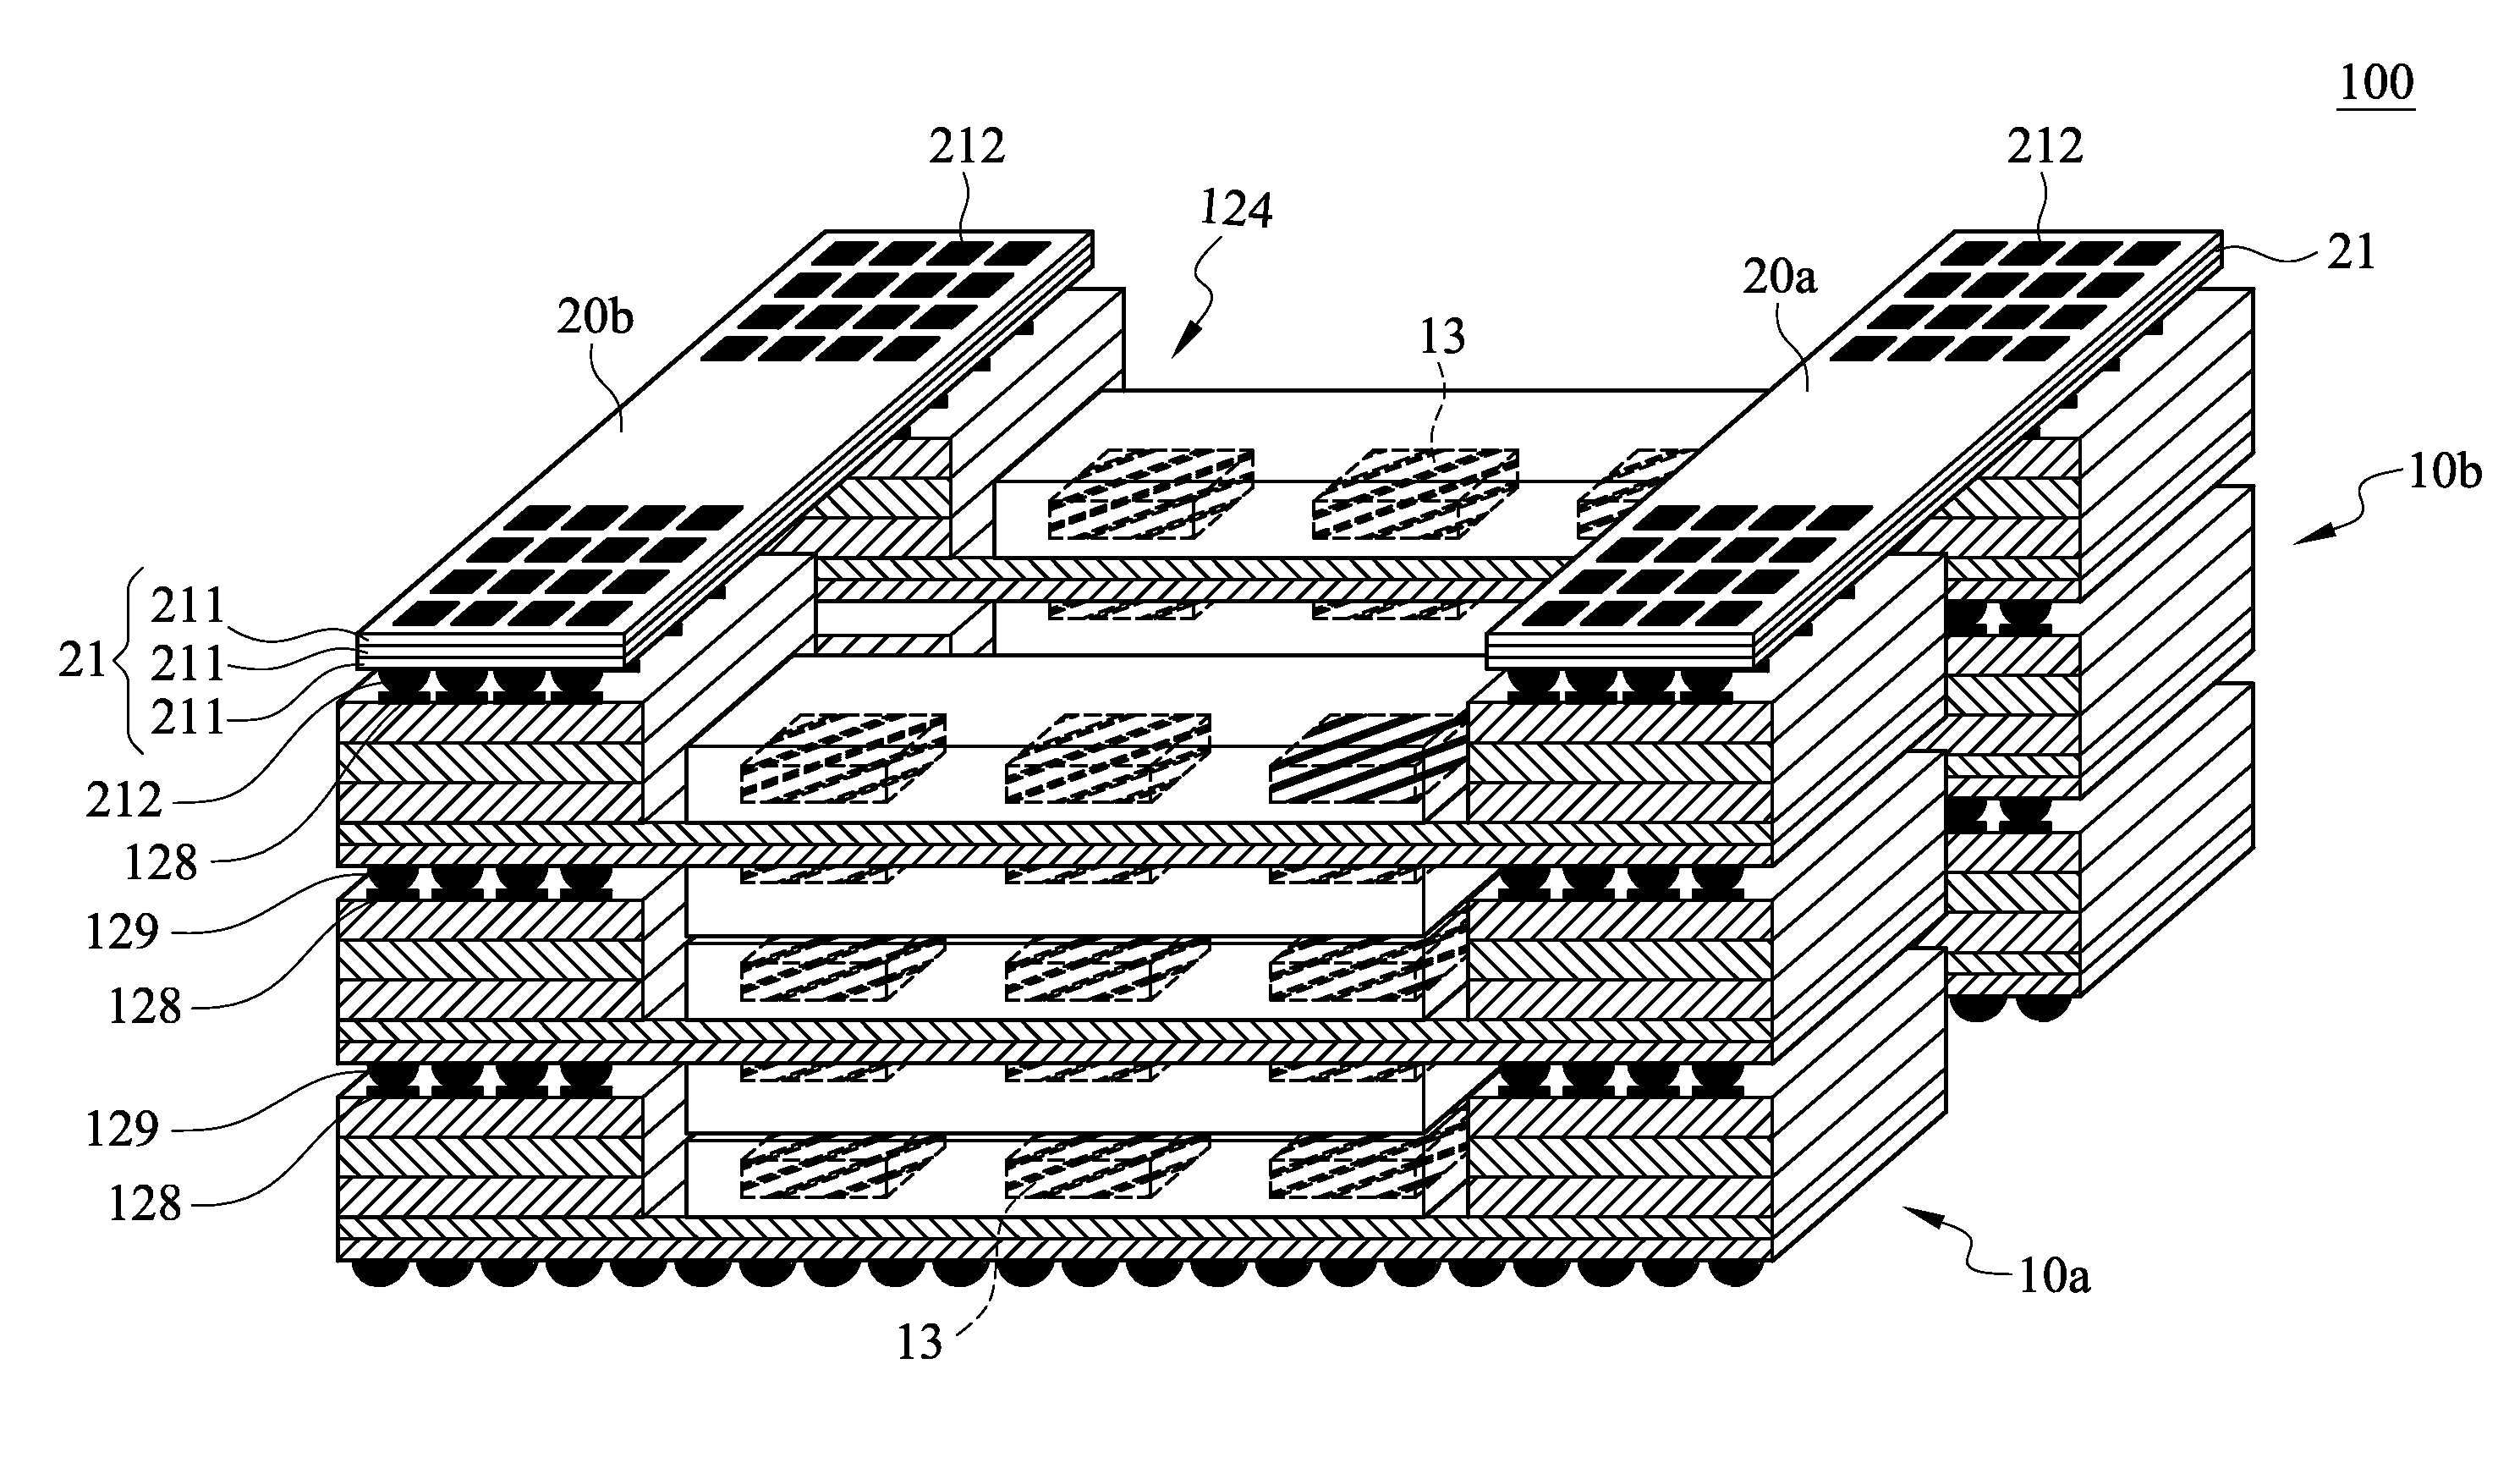 Three-dimensional soc structure formed by stacking multiple chip modules